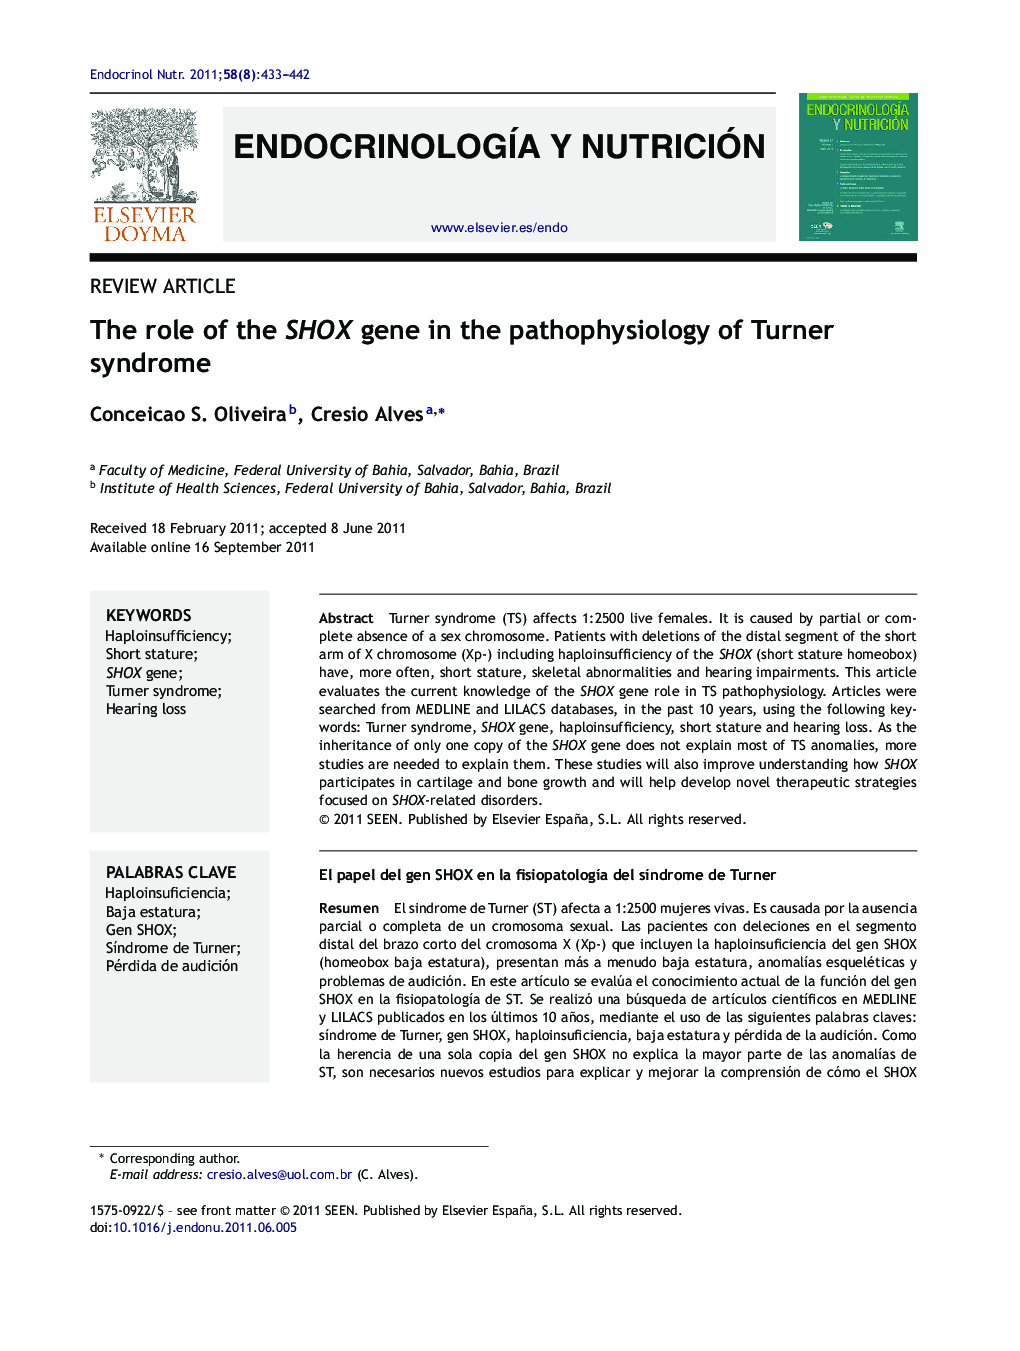 The role of the SHOX gene in the pathophysiology of Turner syndrome